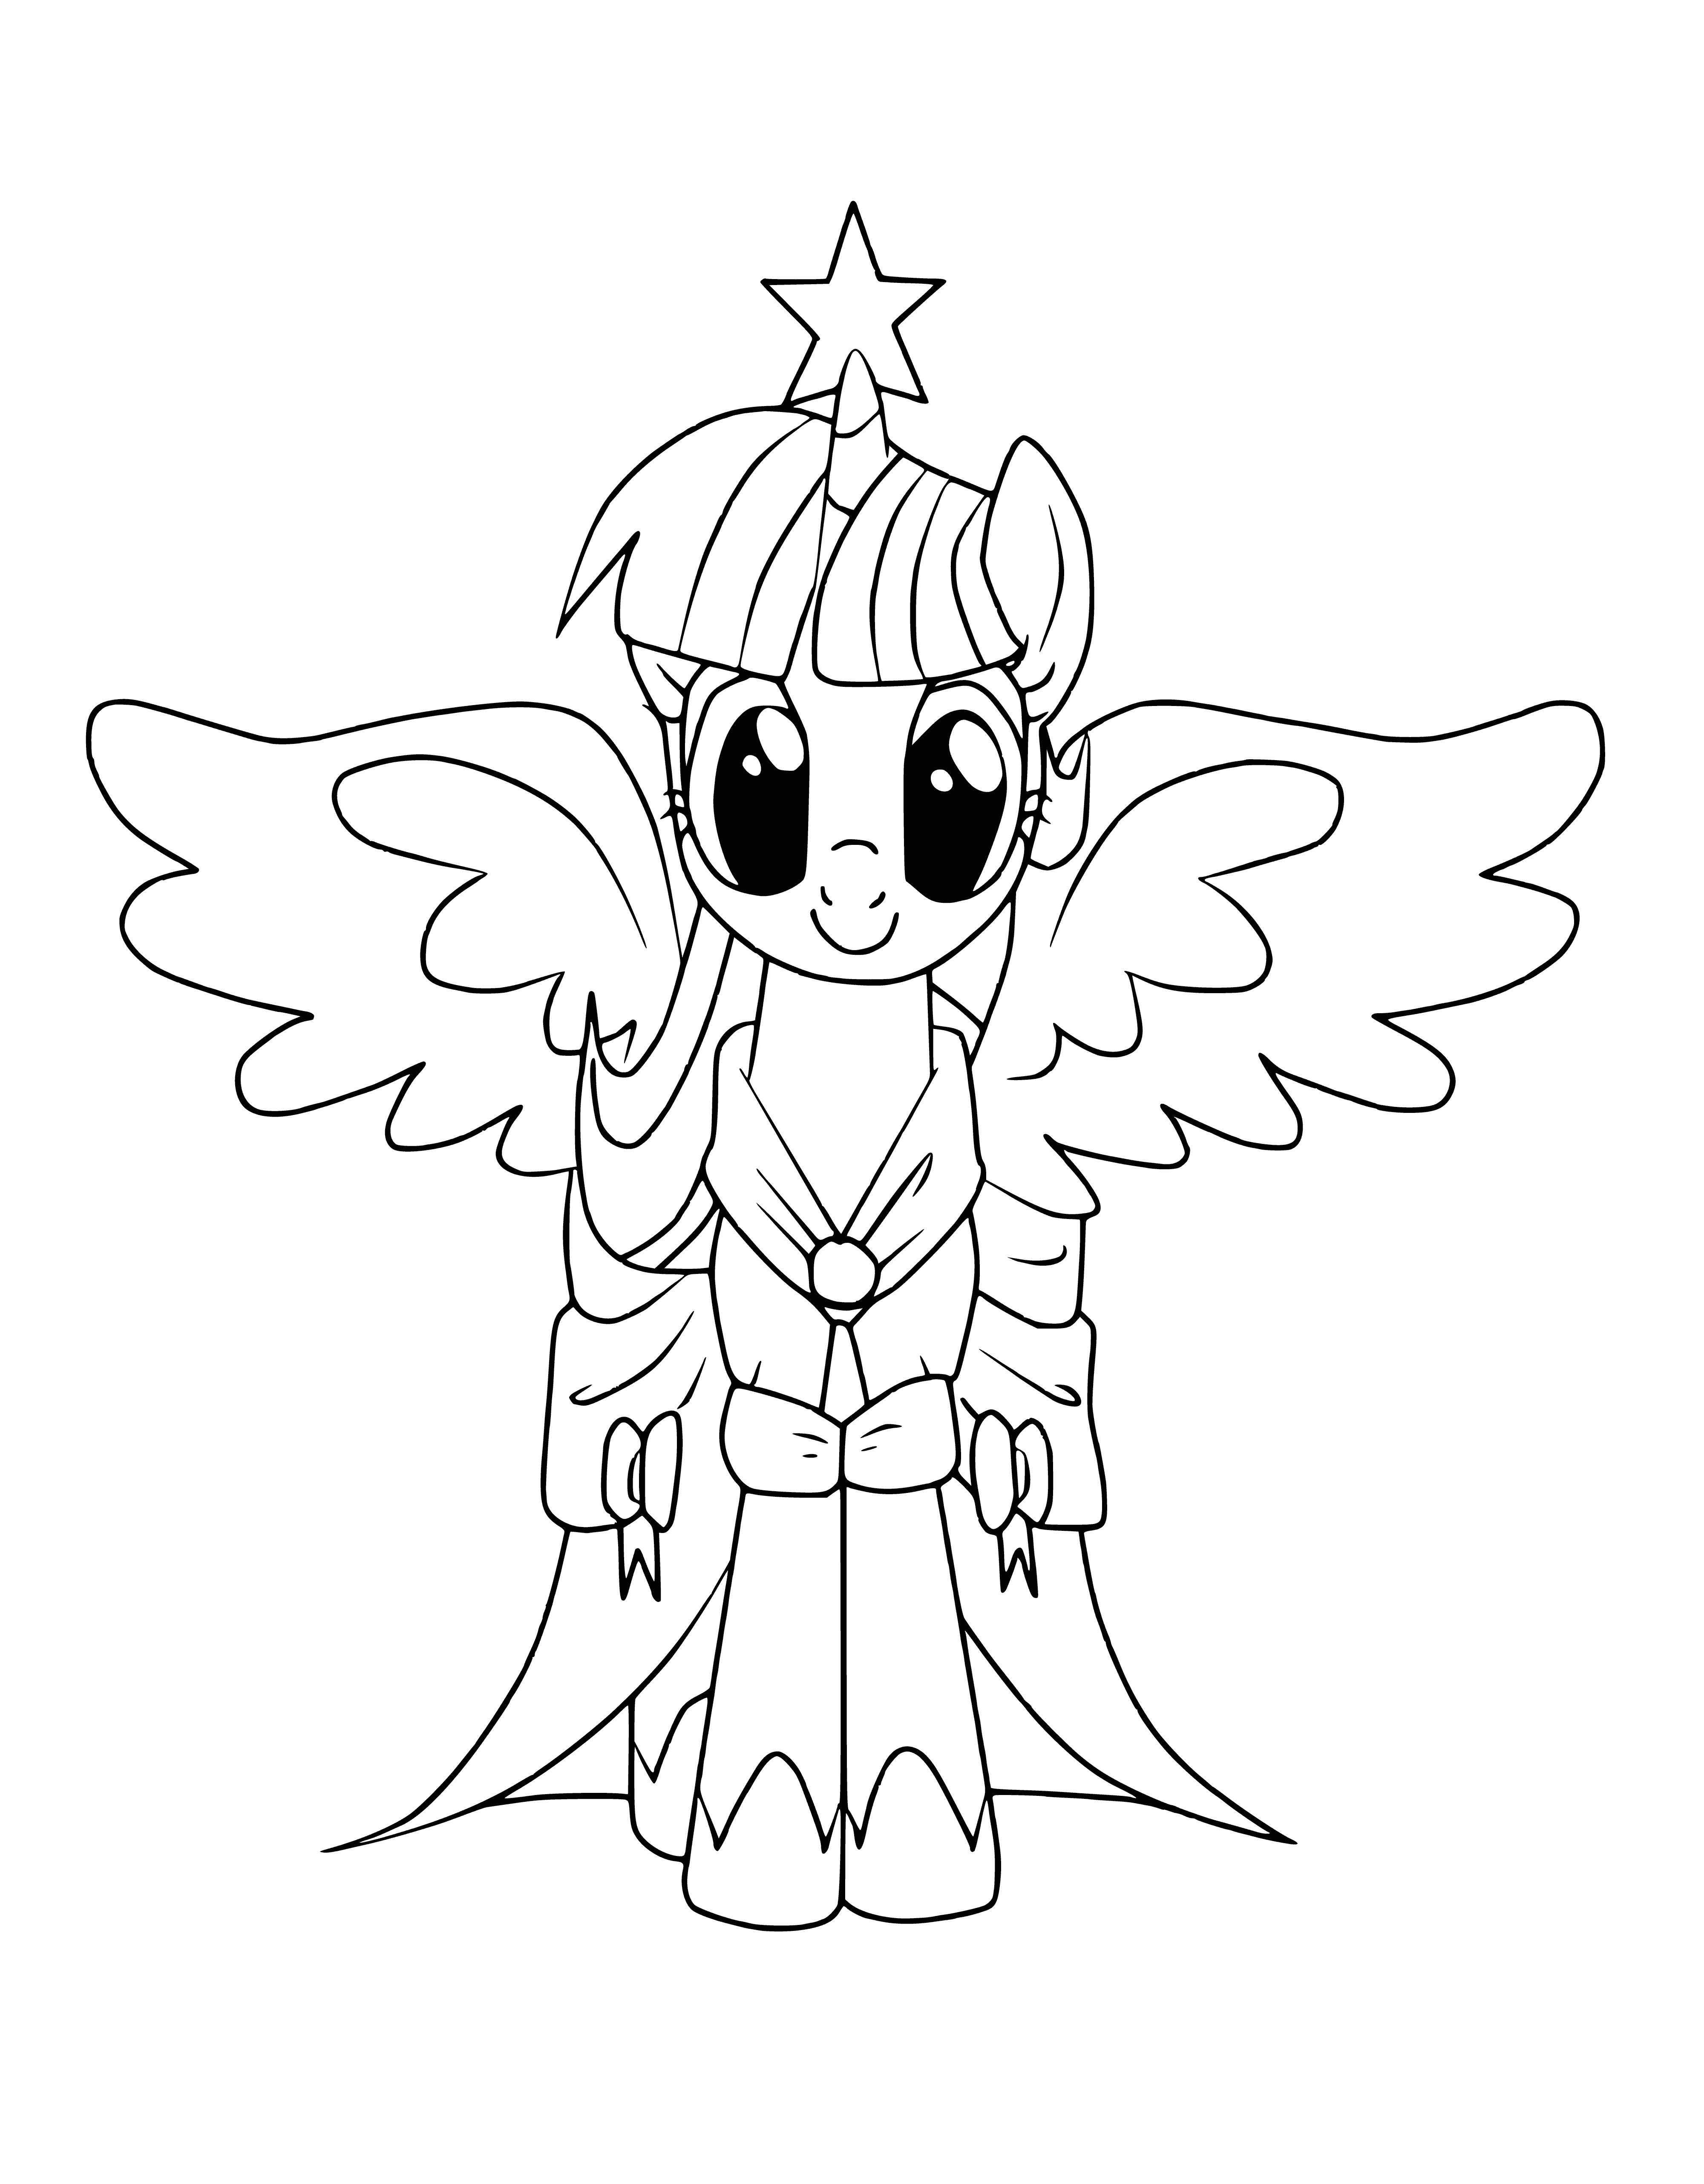 coloring page: Purple unicorn with blue eyes, mane & tail, long spiraled horn, & silver star on forehead.